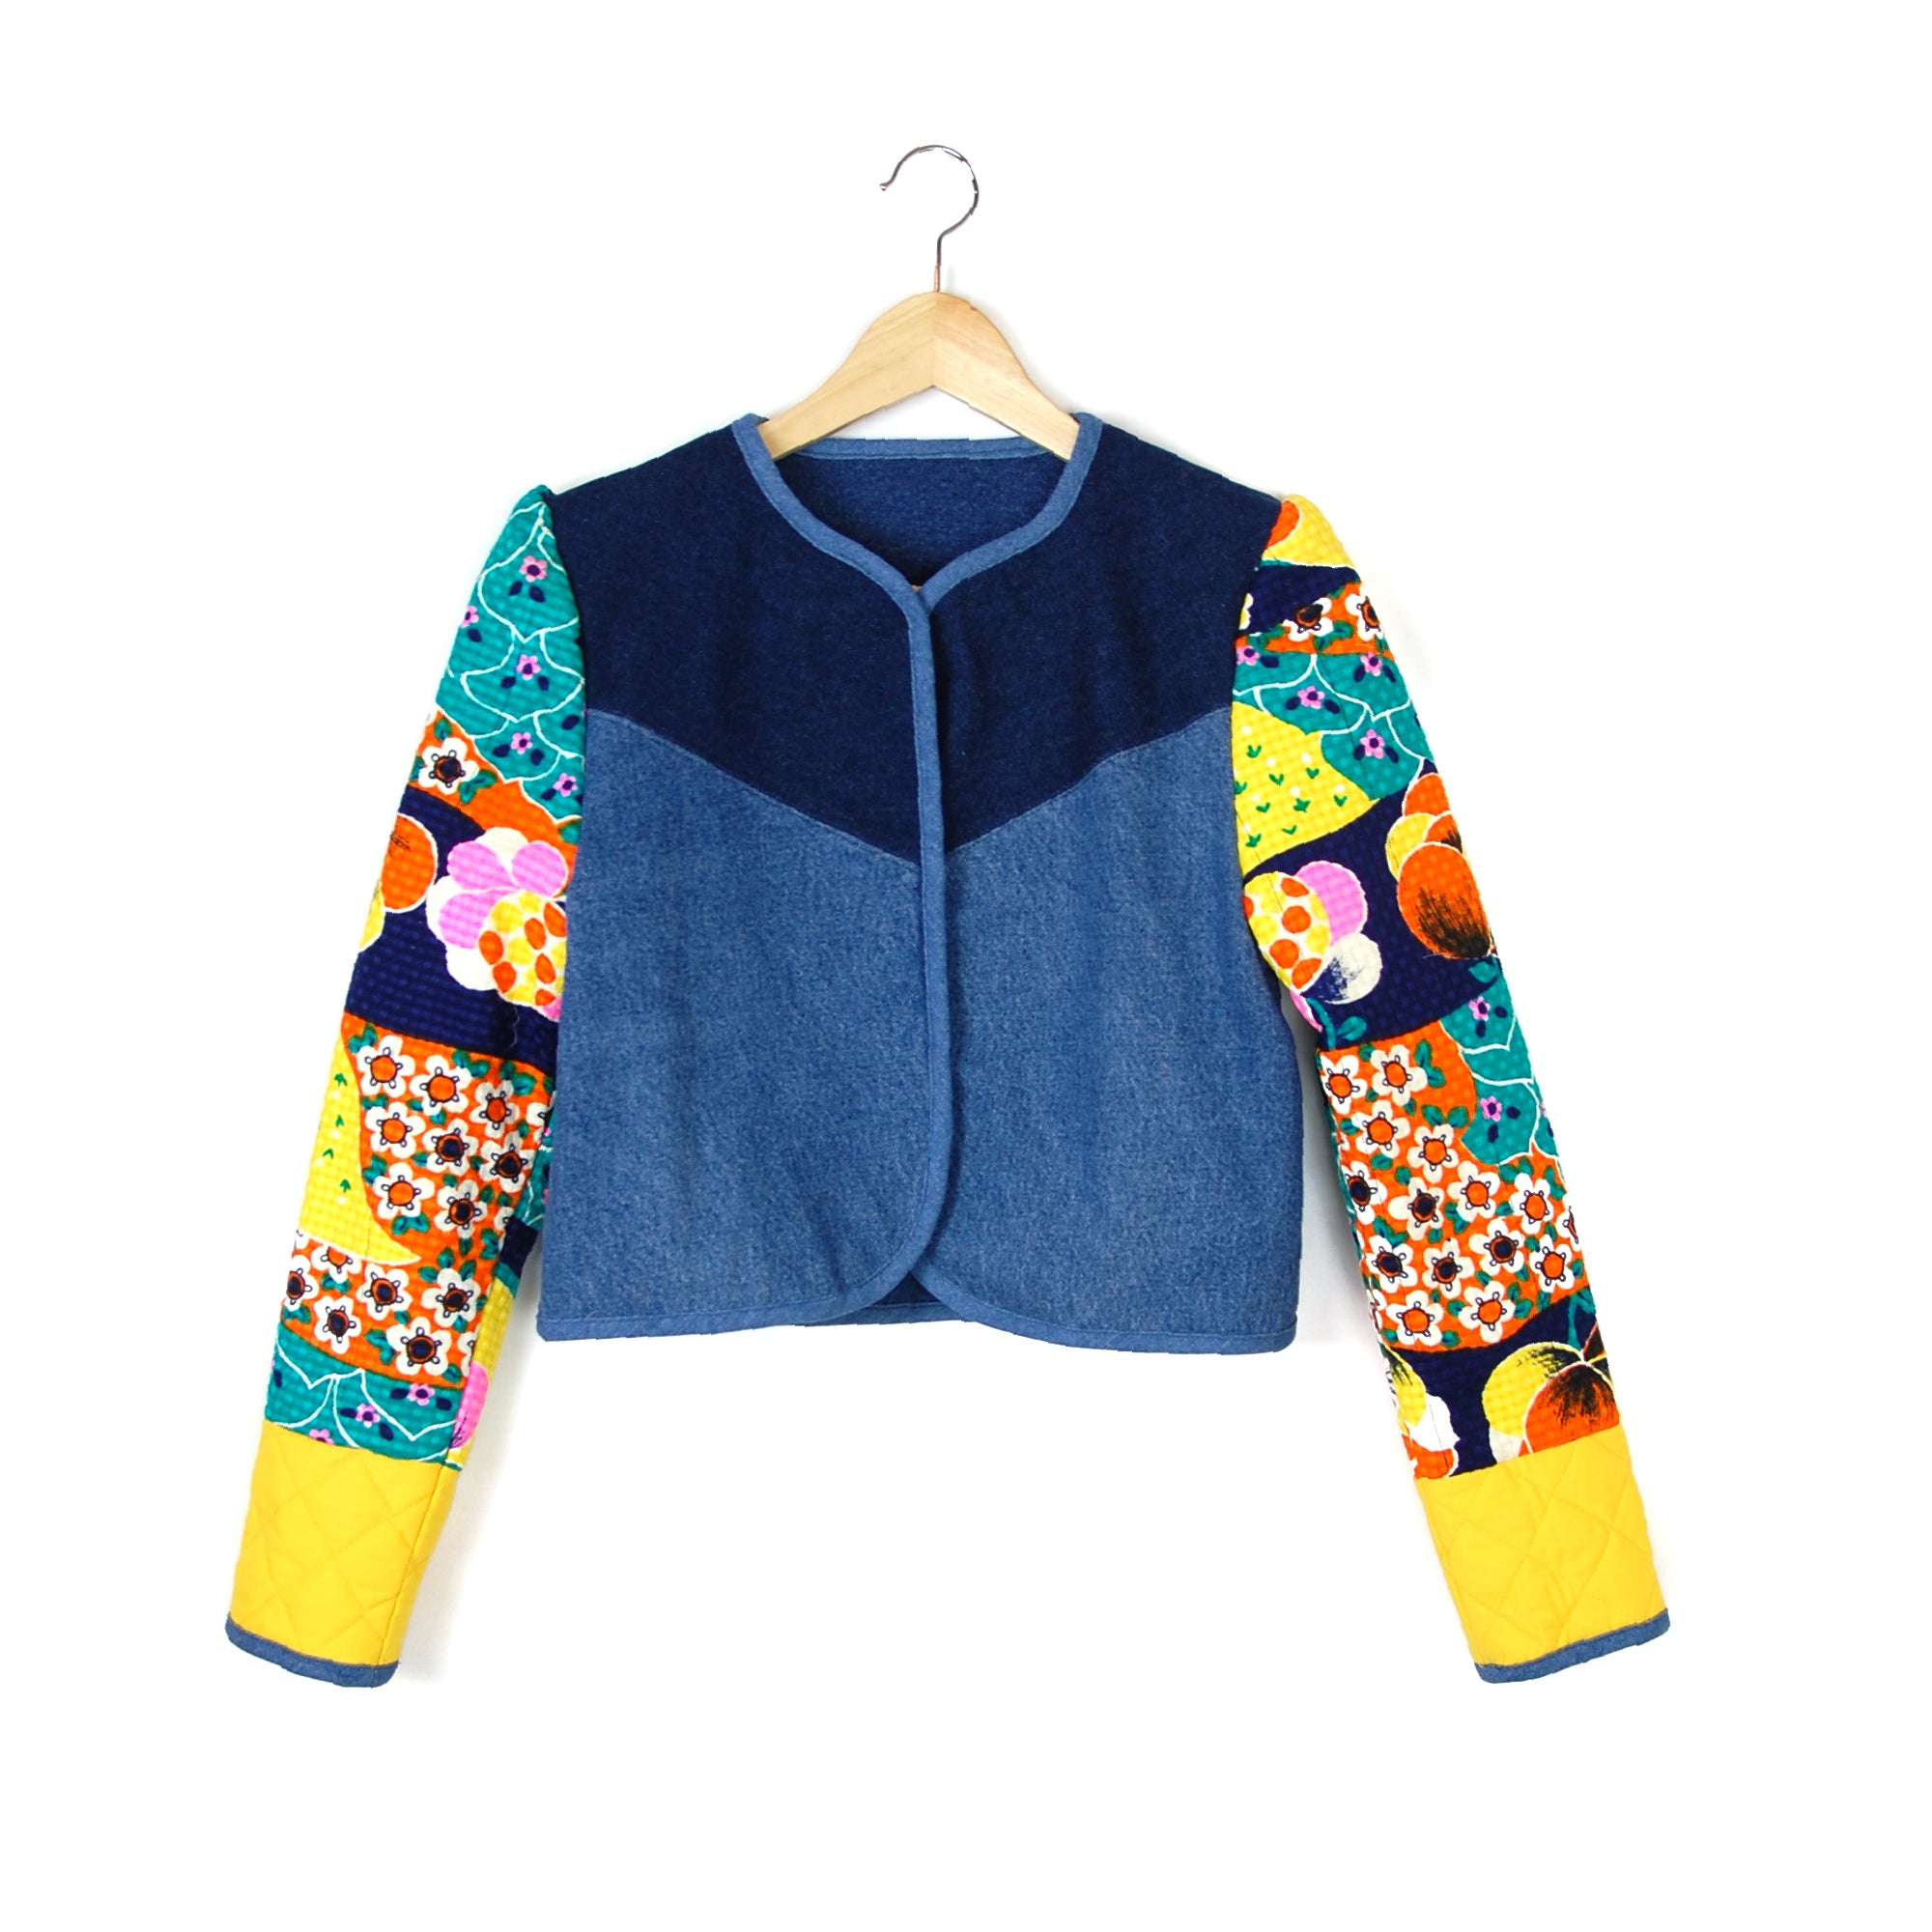 MAGIC CARPET QUILTED JACKET - Late to the Party